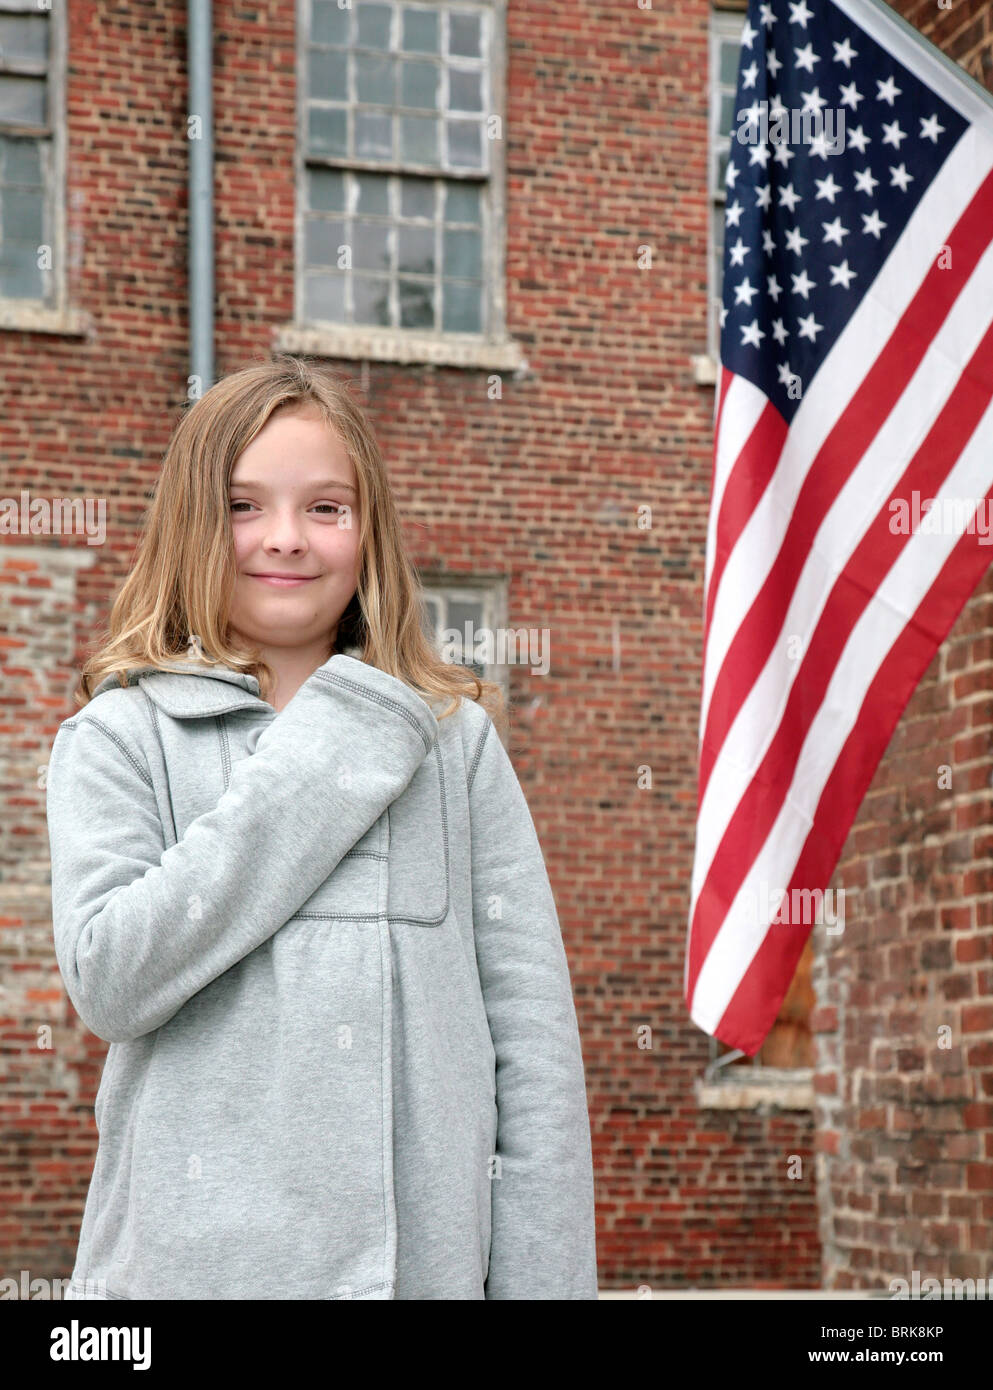 one young cute child with hand on her heart near an American Flag outdoors Stock Photo